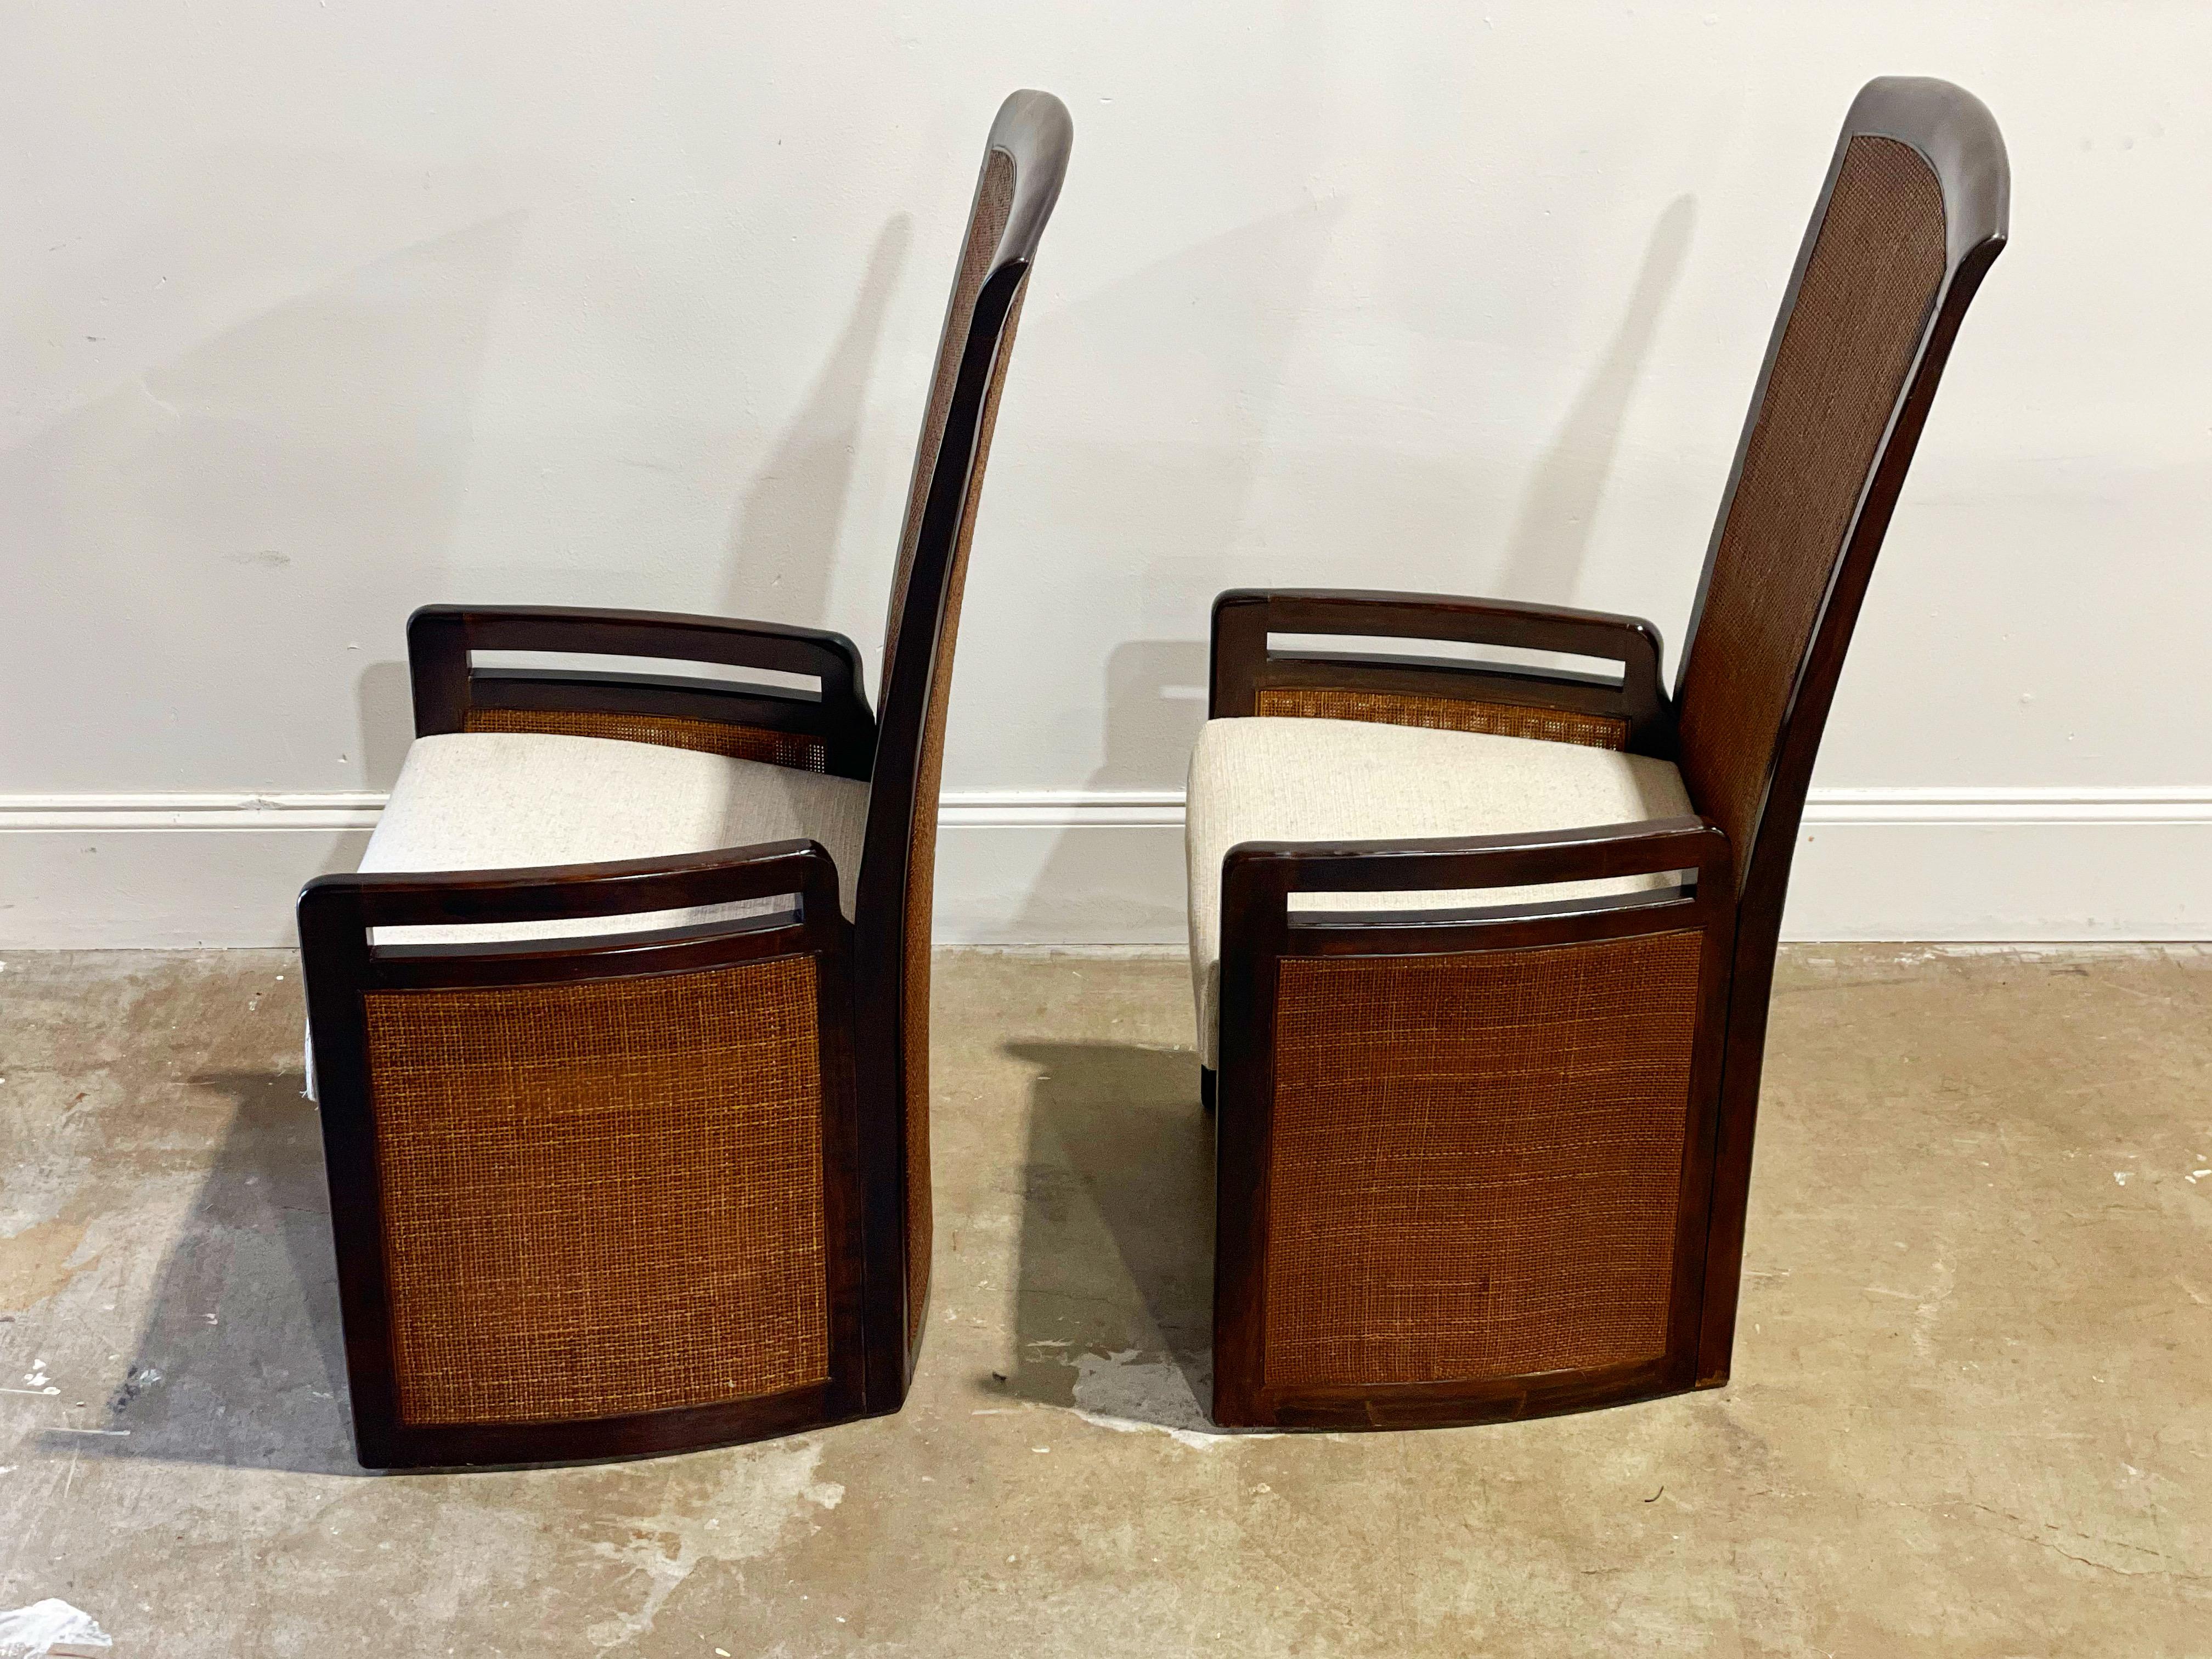 Wicker Organic Modern High Back Chairs in Mahogany and Cane - Vintage Coastal 